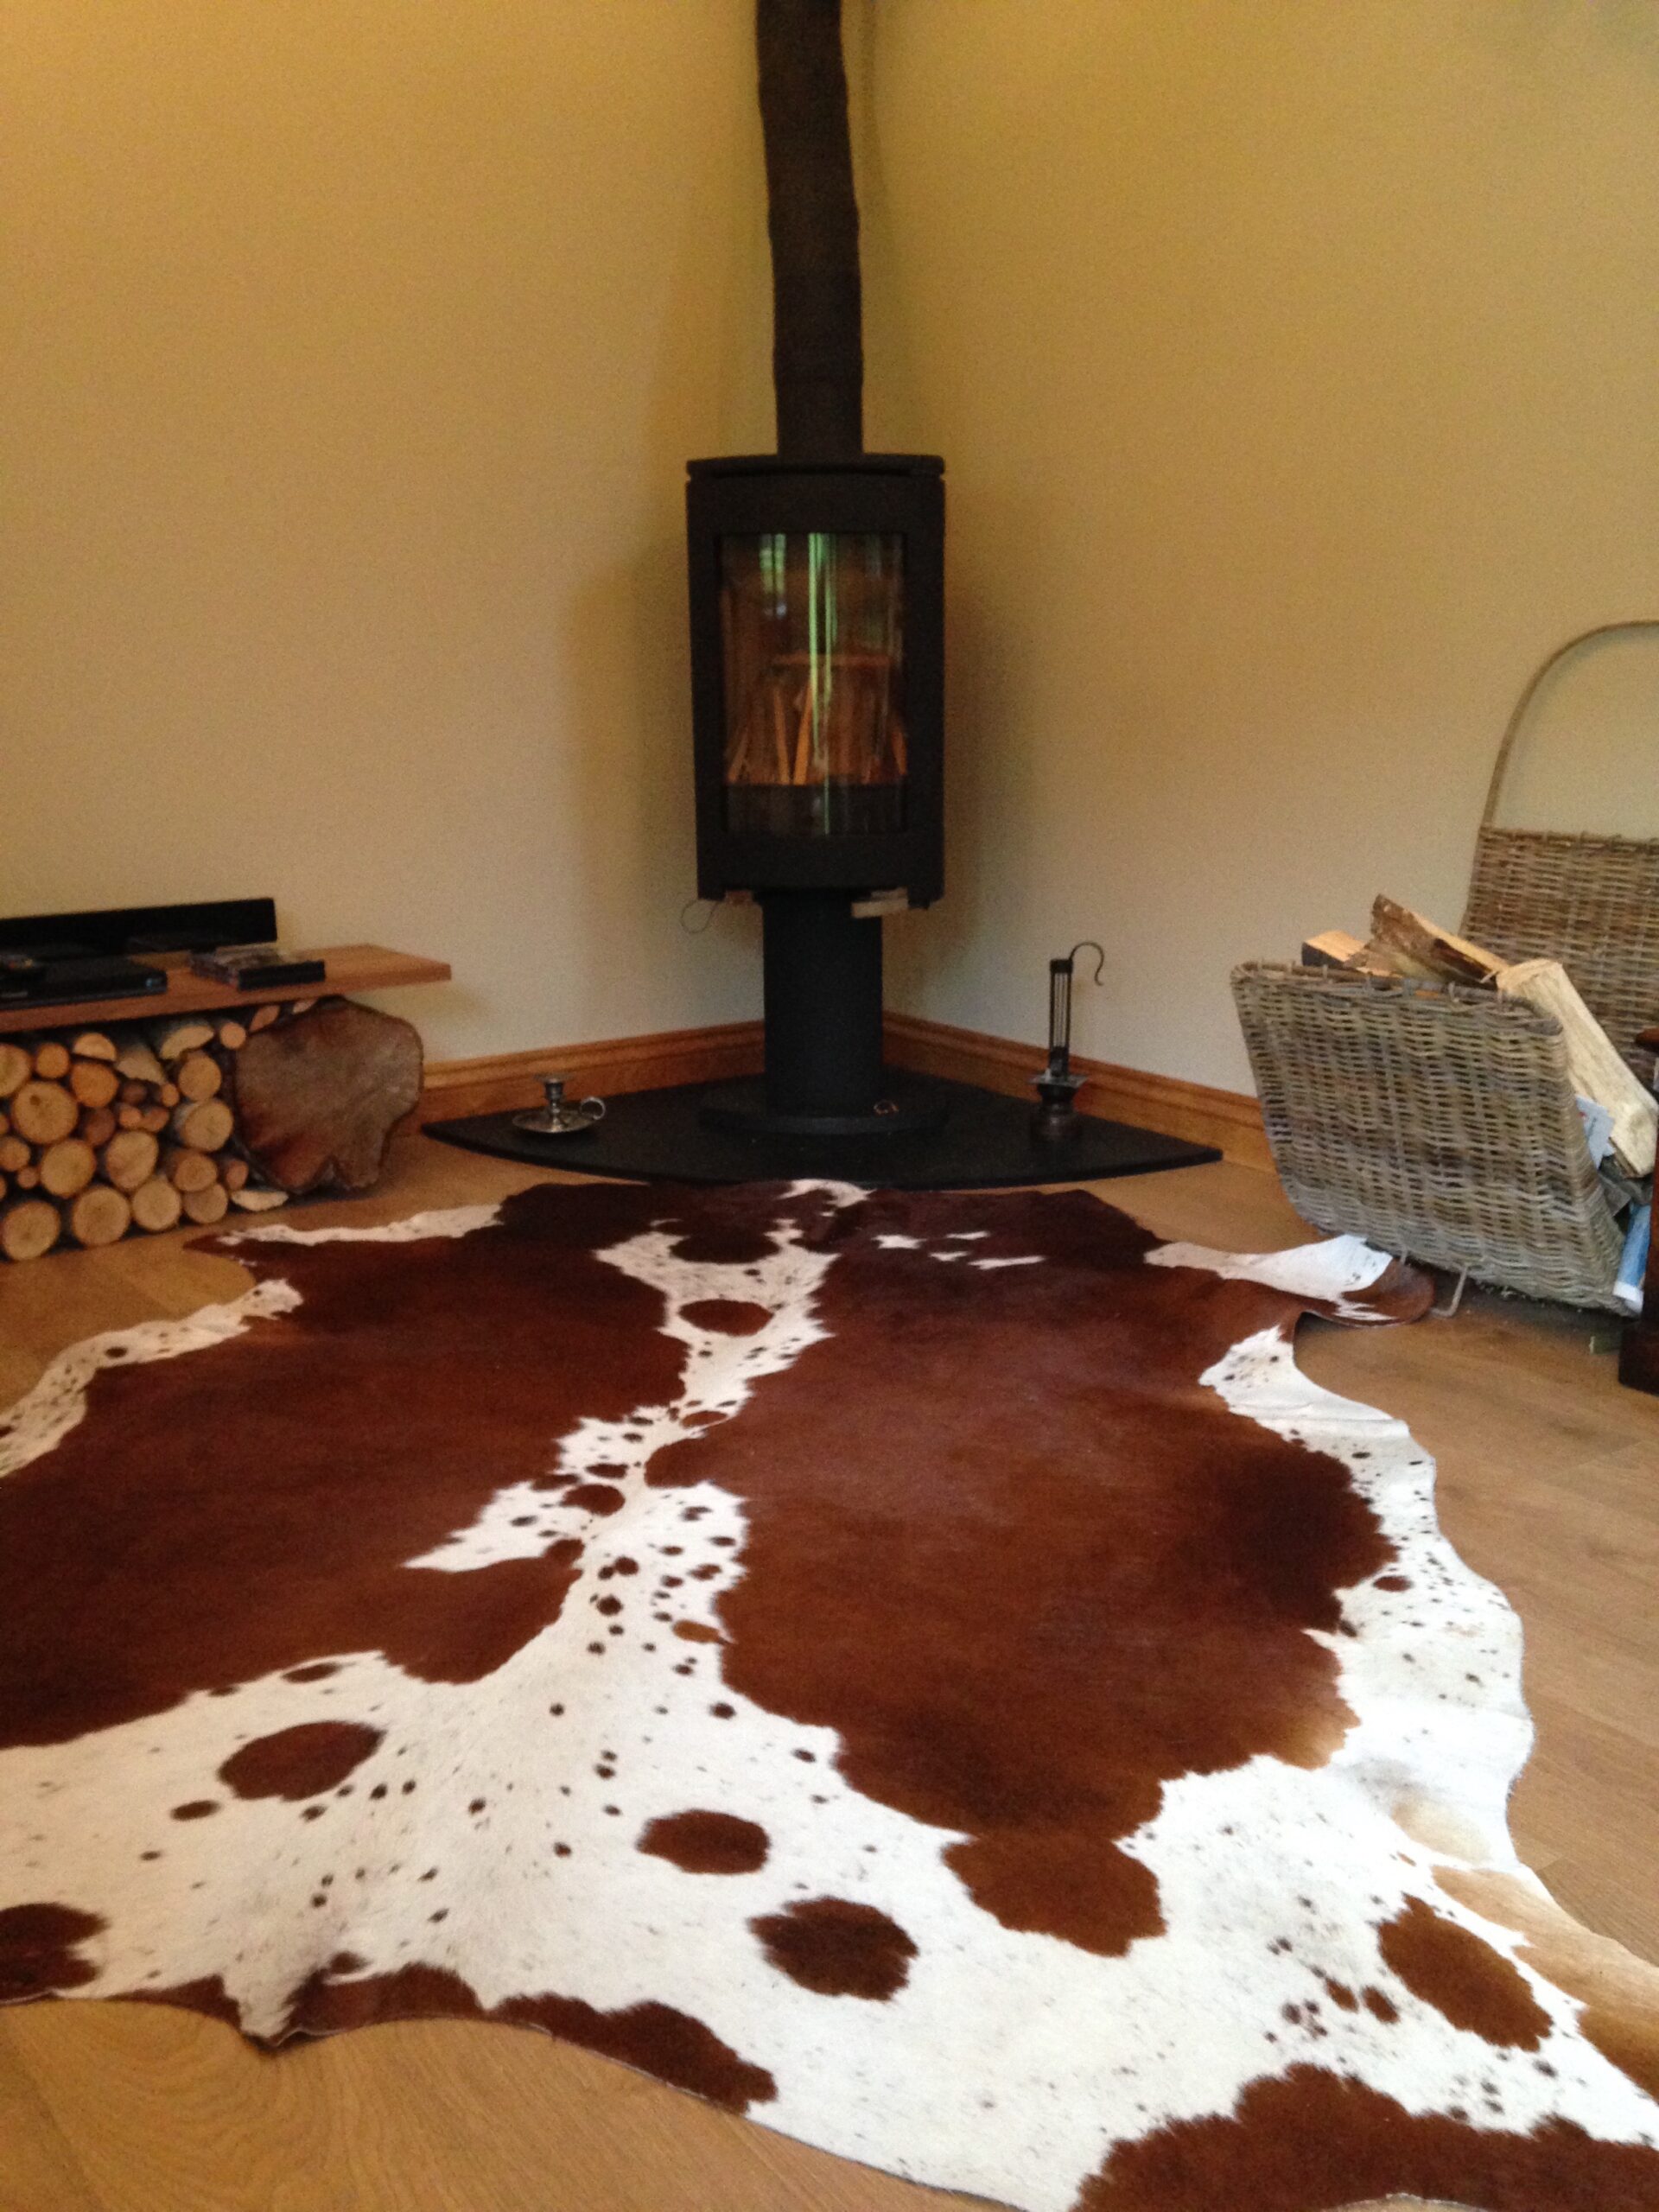 Nguni cowhide rugs, white & black spot, cowhides, skins, animal print, cowhide, luxury interiors, home interiors, interior styling, soft furnishings, sustainable, ethical, skins,